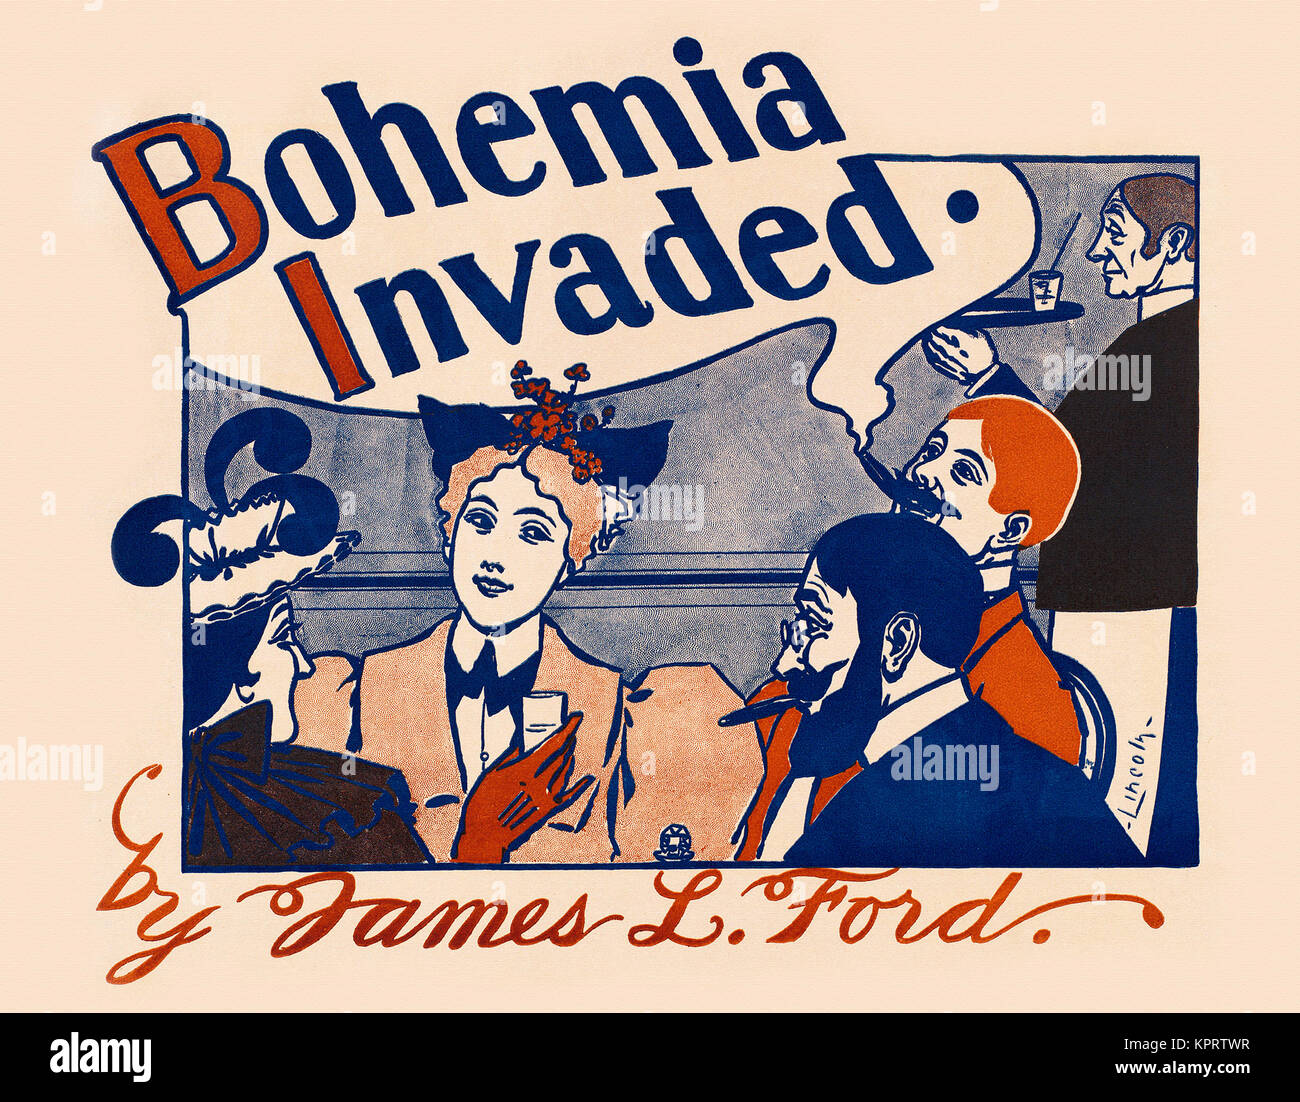 Bohemia invaded. By James L. Ford Stock Photo